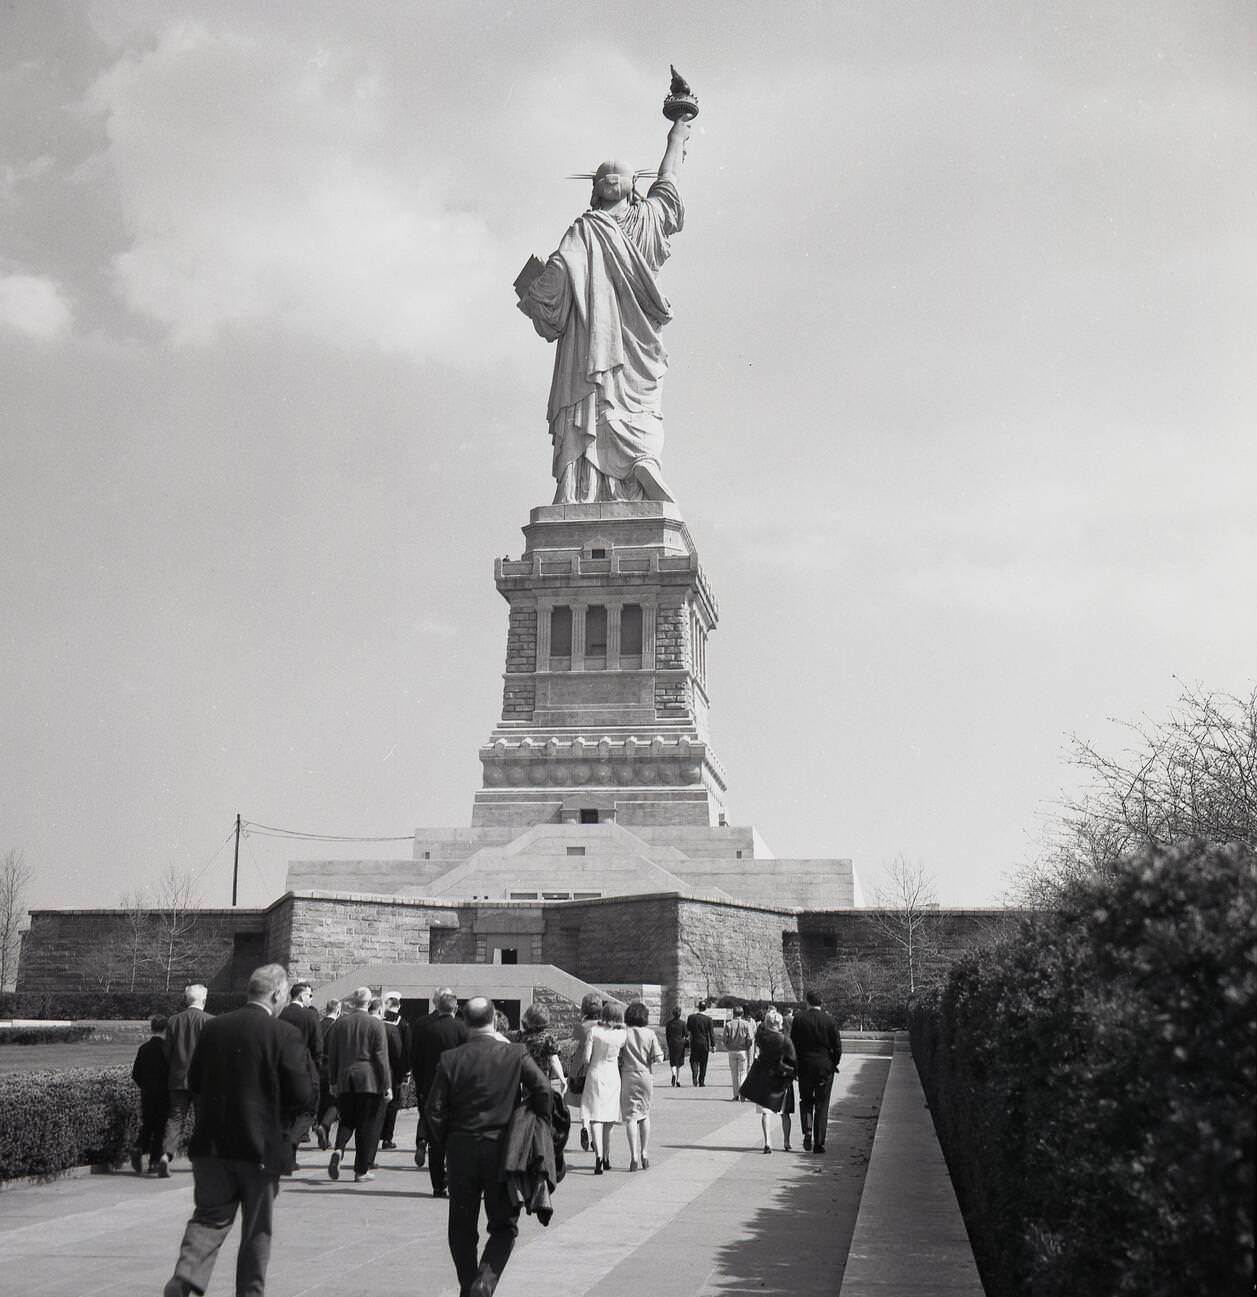 People Walking Up To Visit The Statue Of Liberty On Staten Island, 1950S.